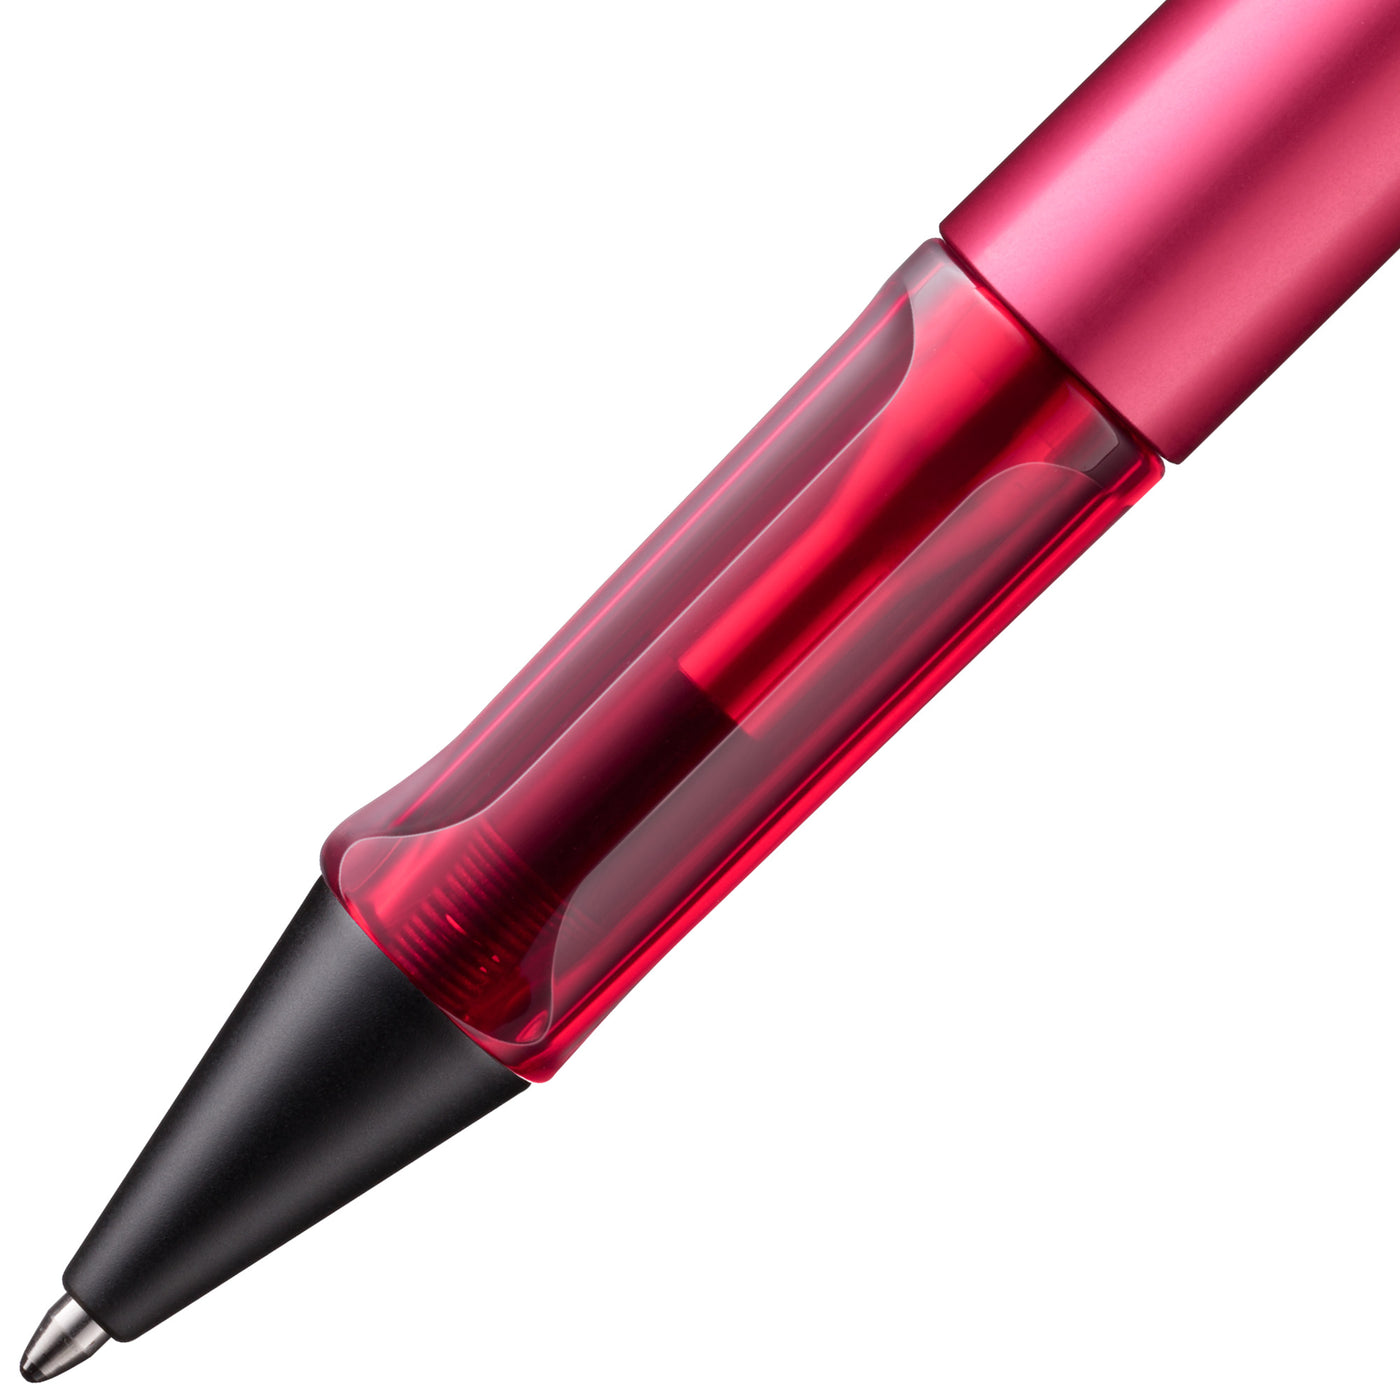 LAMY AL-star Special Edition Fiery Ballpoint Pen red grip section